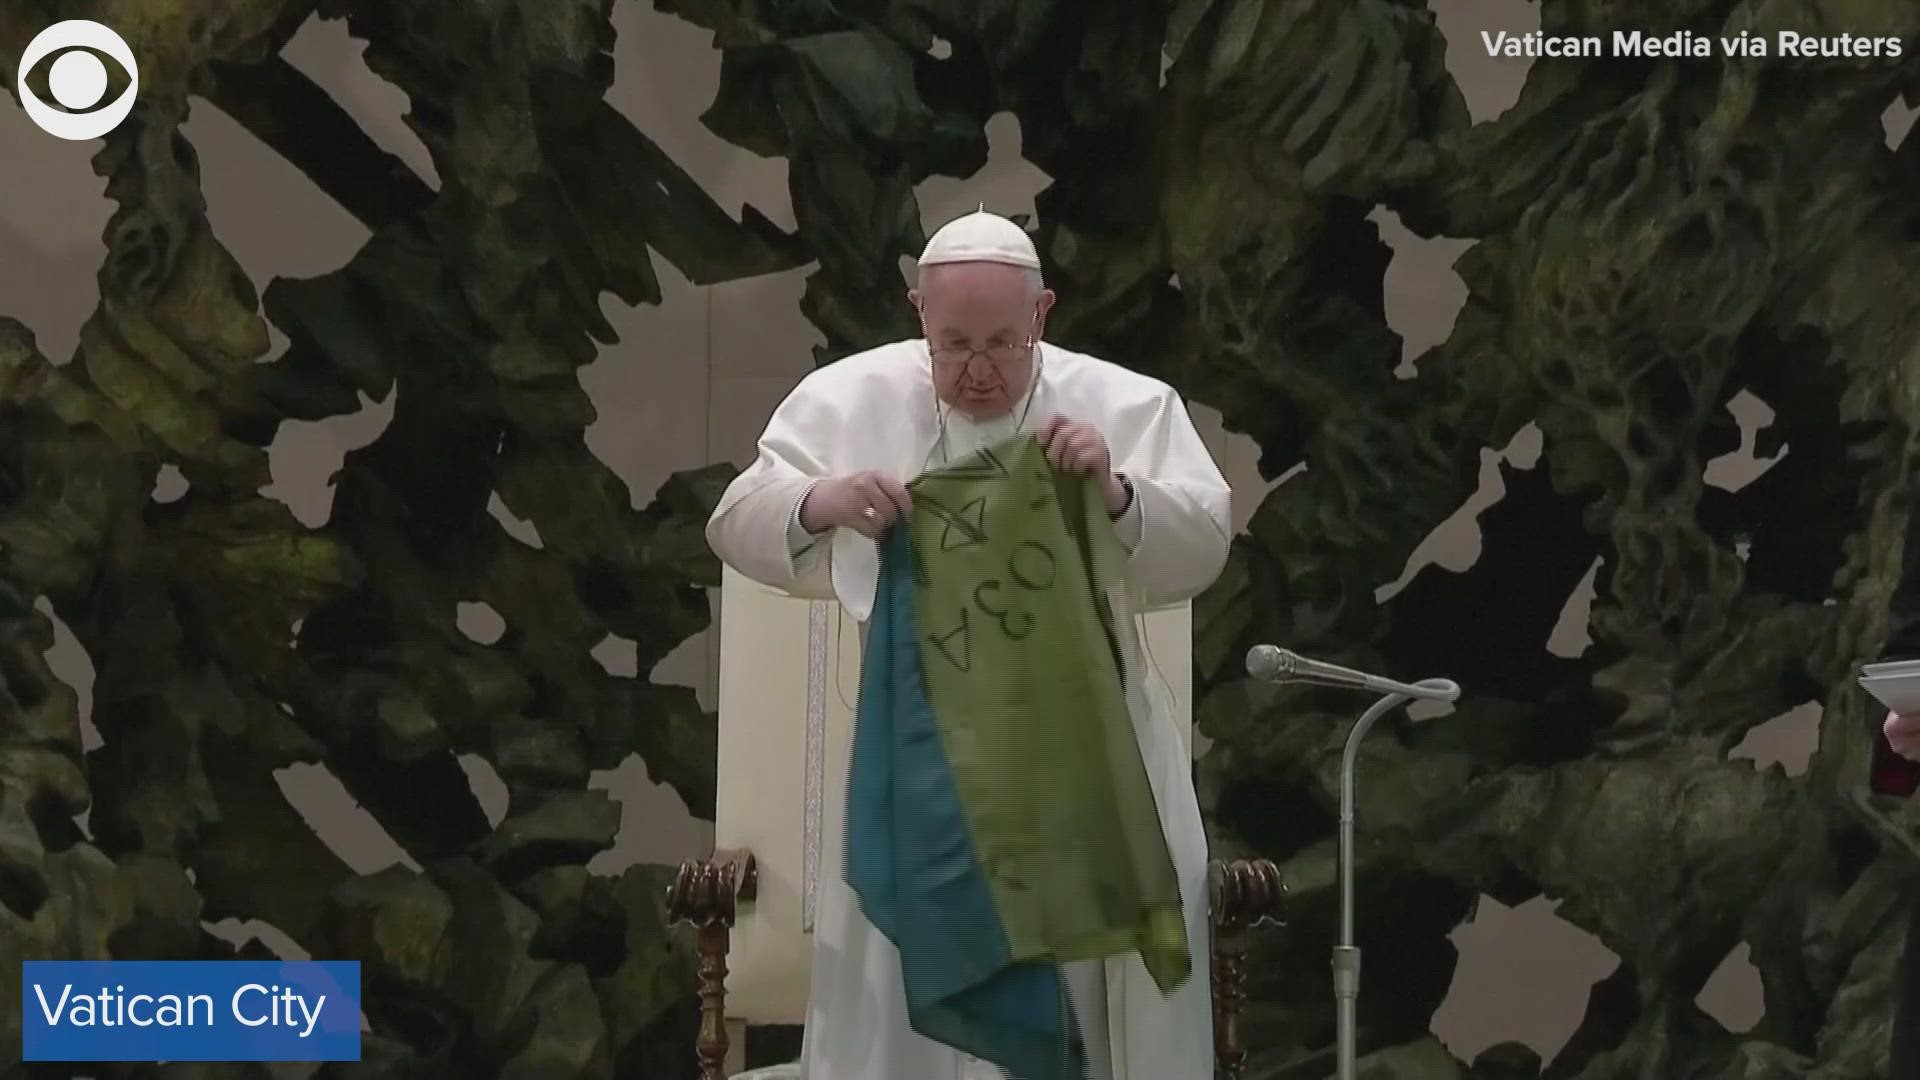 The Pope said the flag comes from the city of Bucha and also invited Ukrainian refugee children to stand with him.